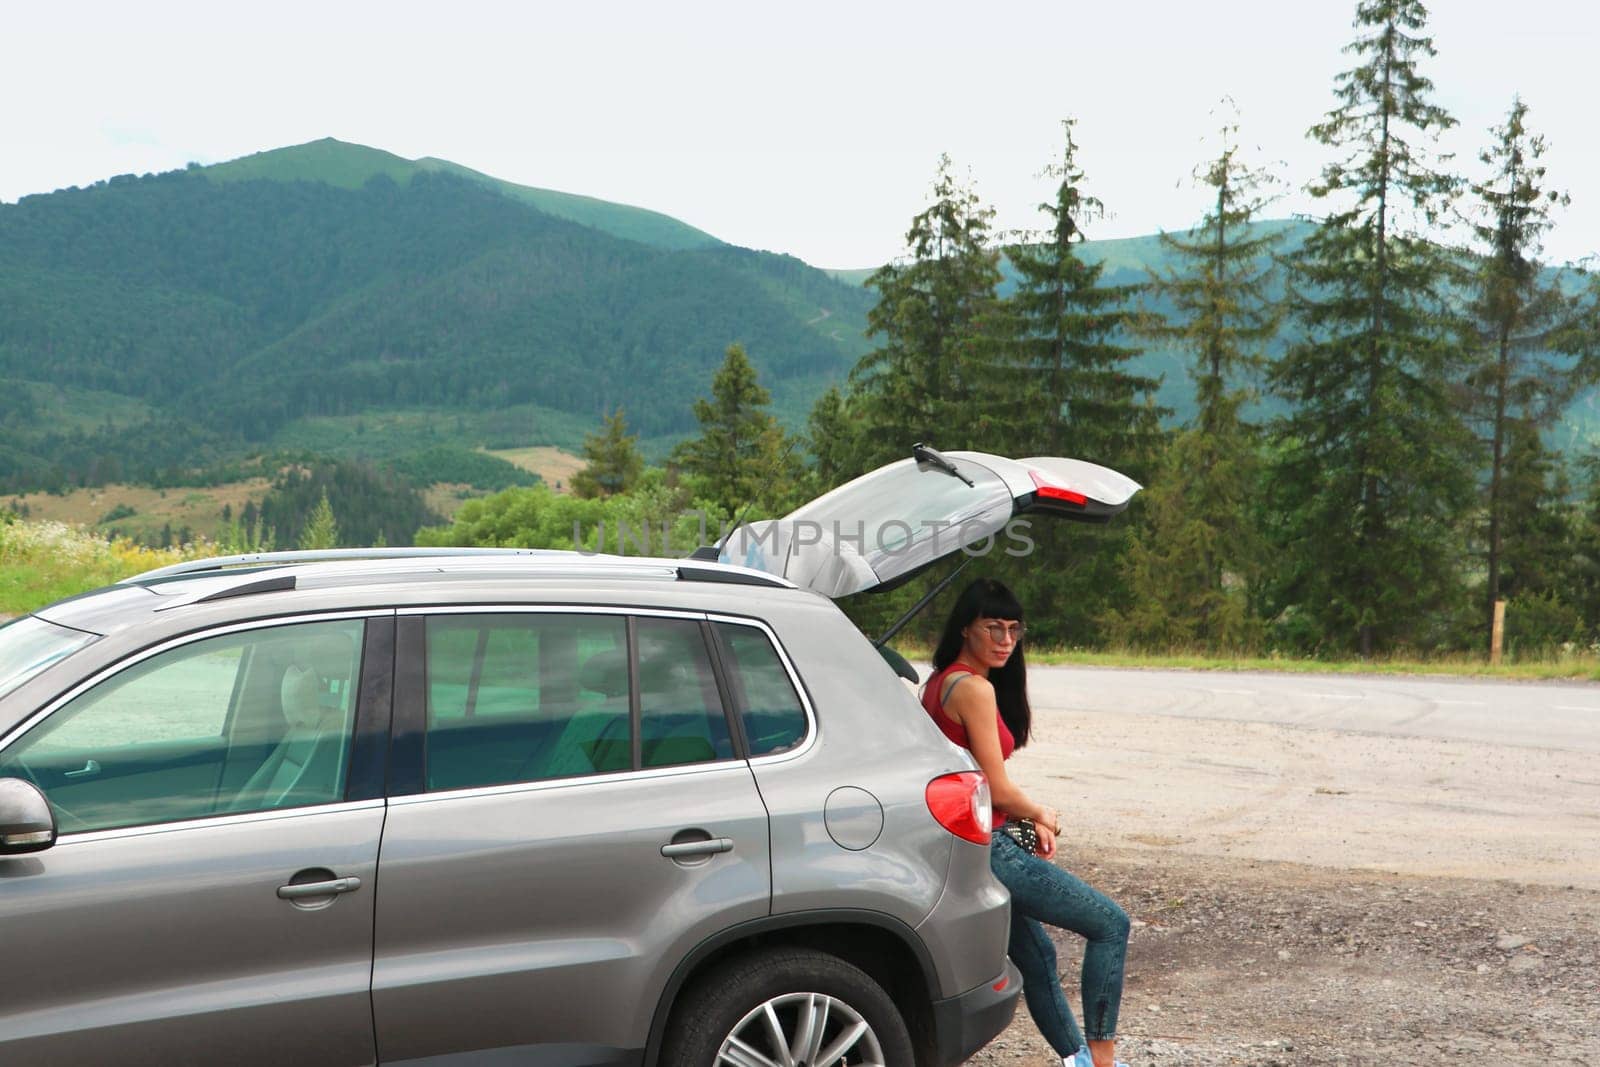 selective focus. Car on the side of the road. a young woman stands near a broken car. Hitchhiking road trip concept. Mountain landscape. Road to the mountains. Part of a gray car. High quality photo